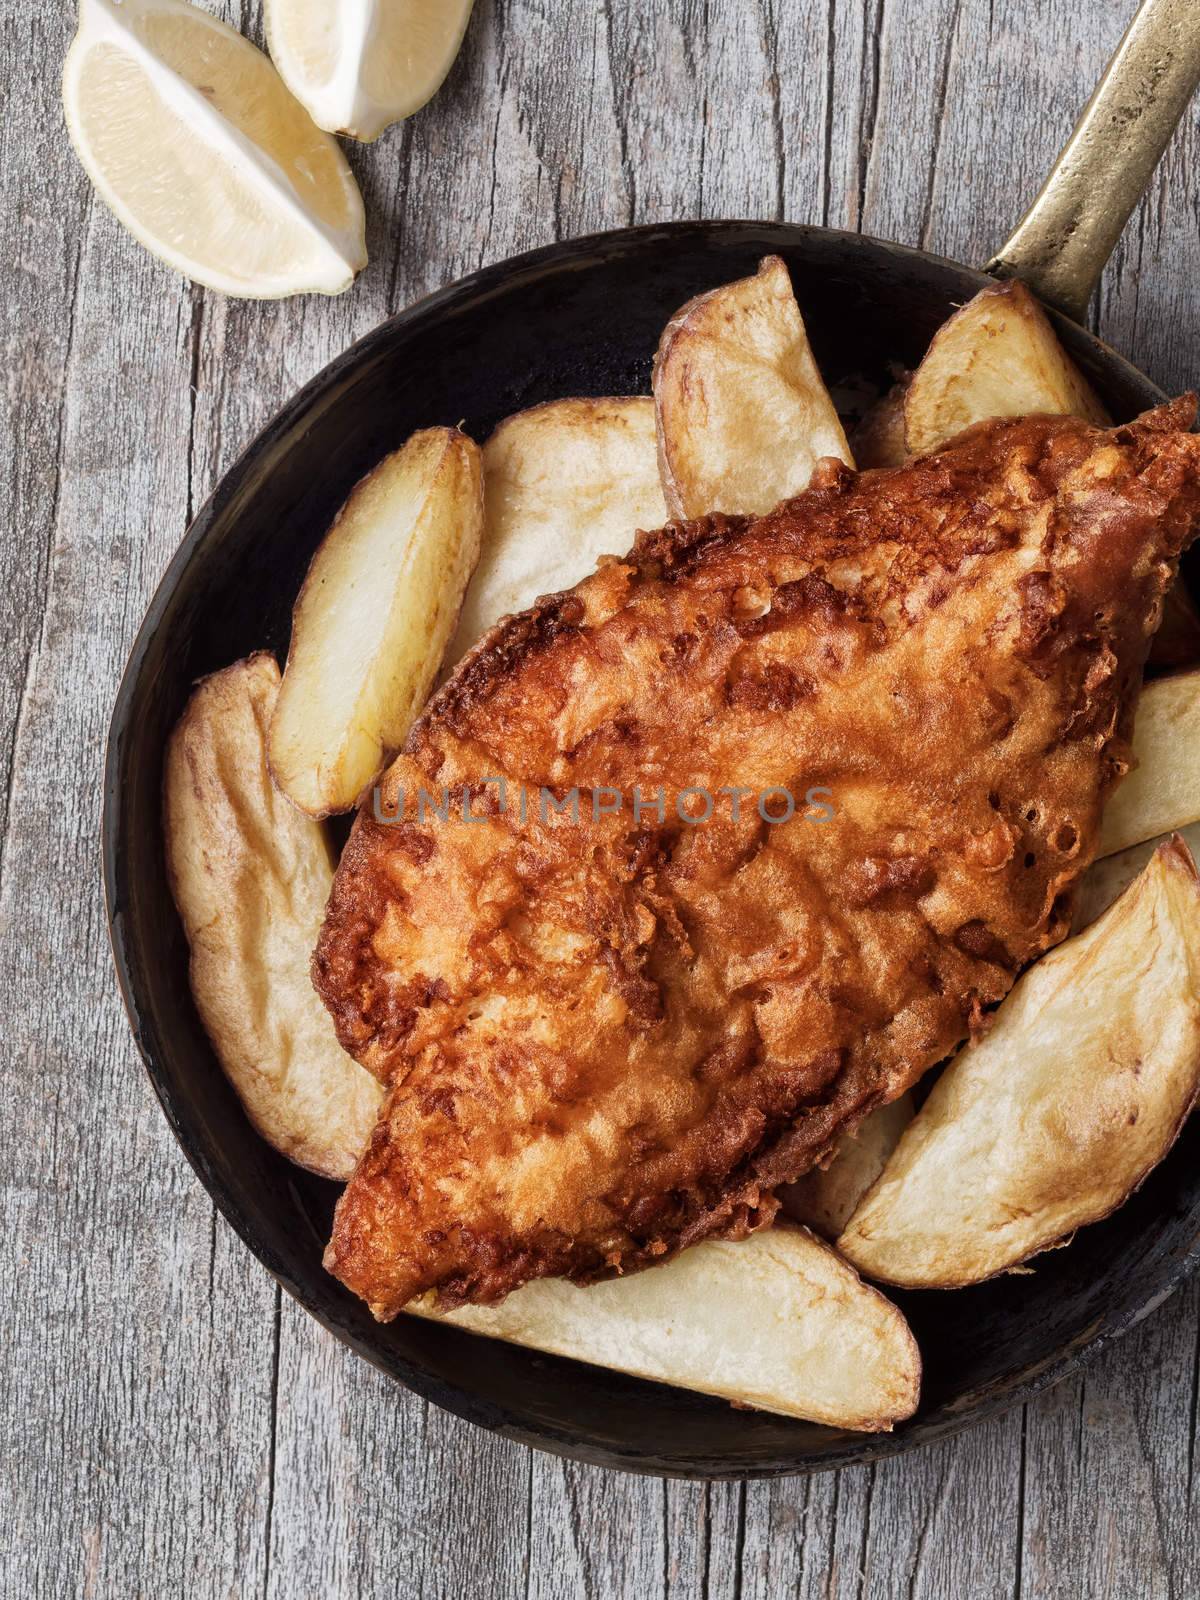 rustic traditional english fish and chips by zkruger